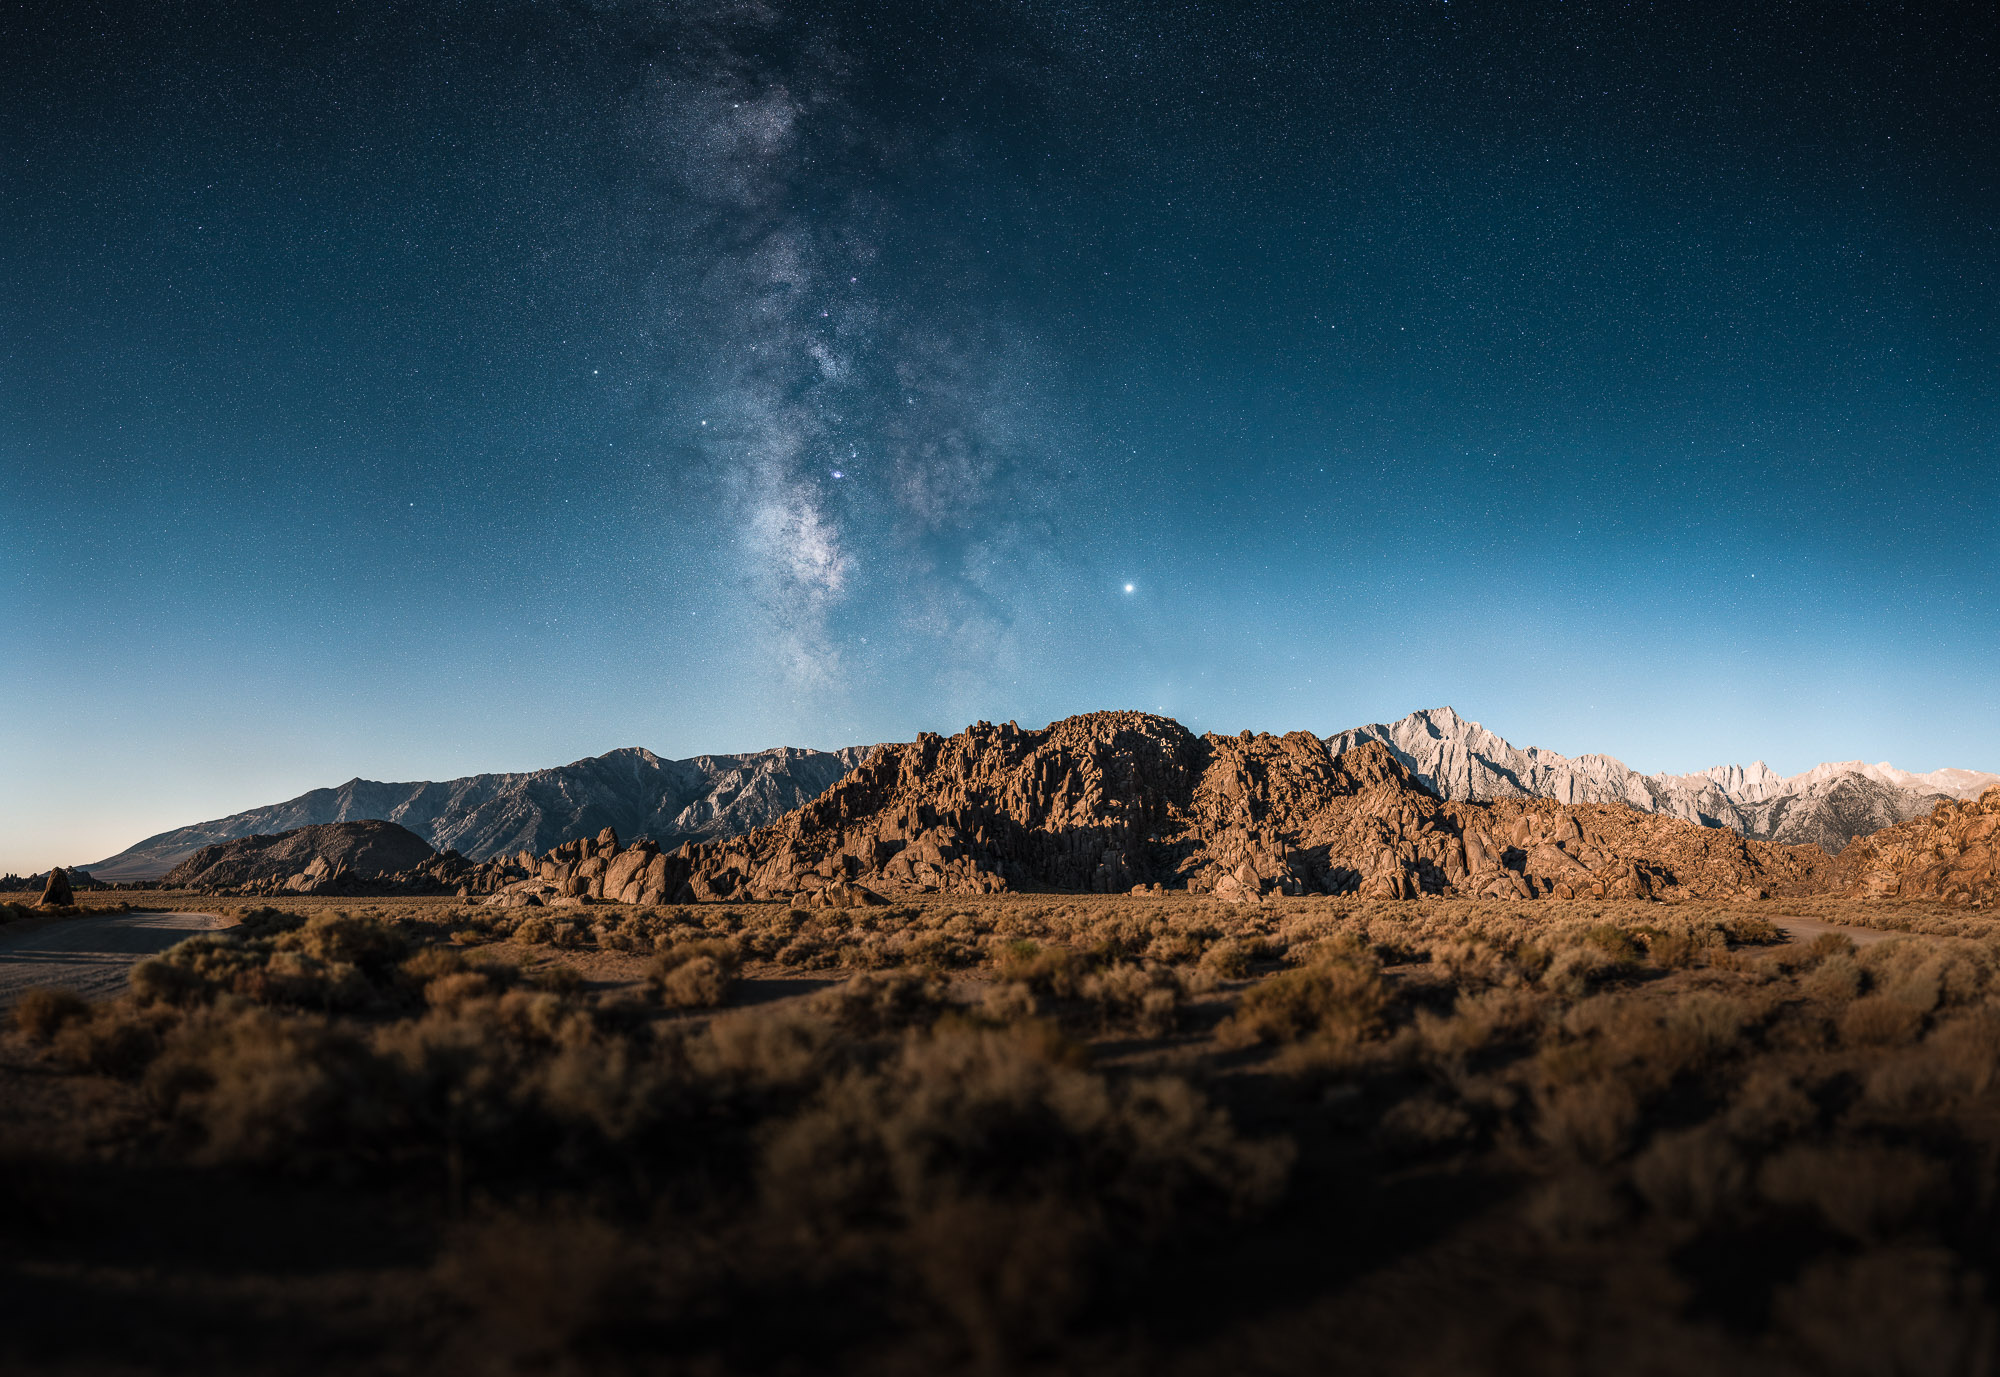 Alabama Hills and the Milky Way at moonrise shot on the Sigma 105mm f/1.4 DG HSM Art Lens